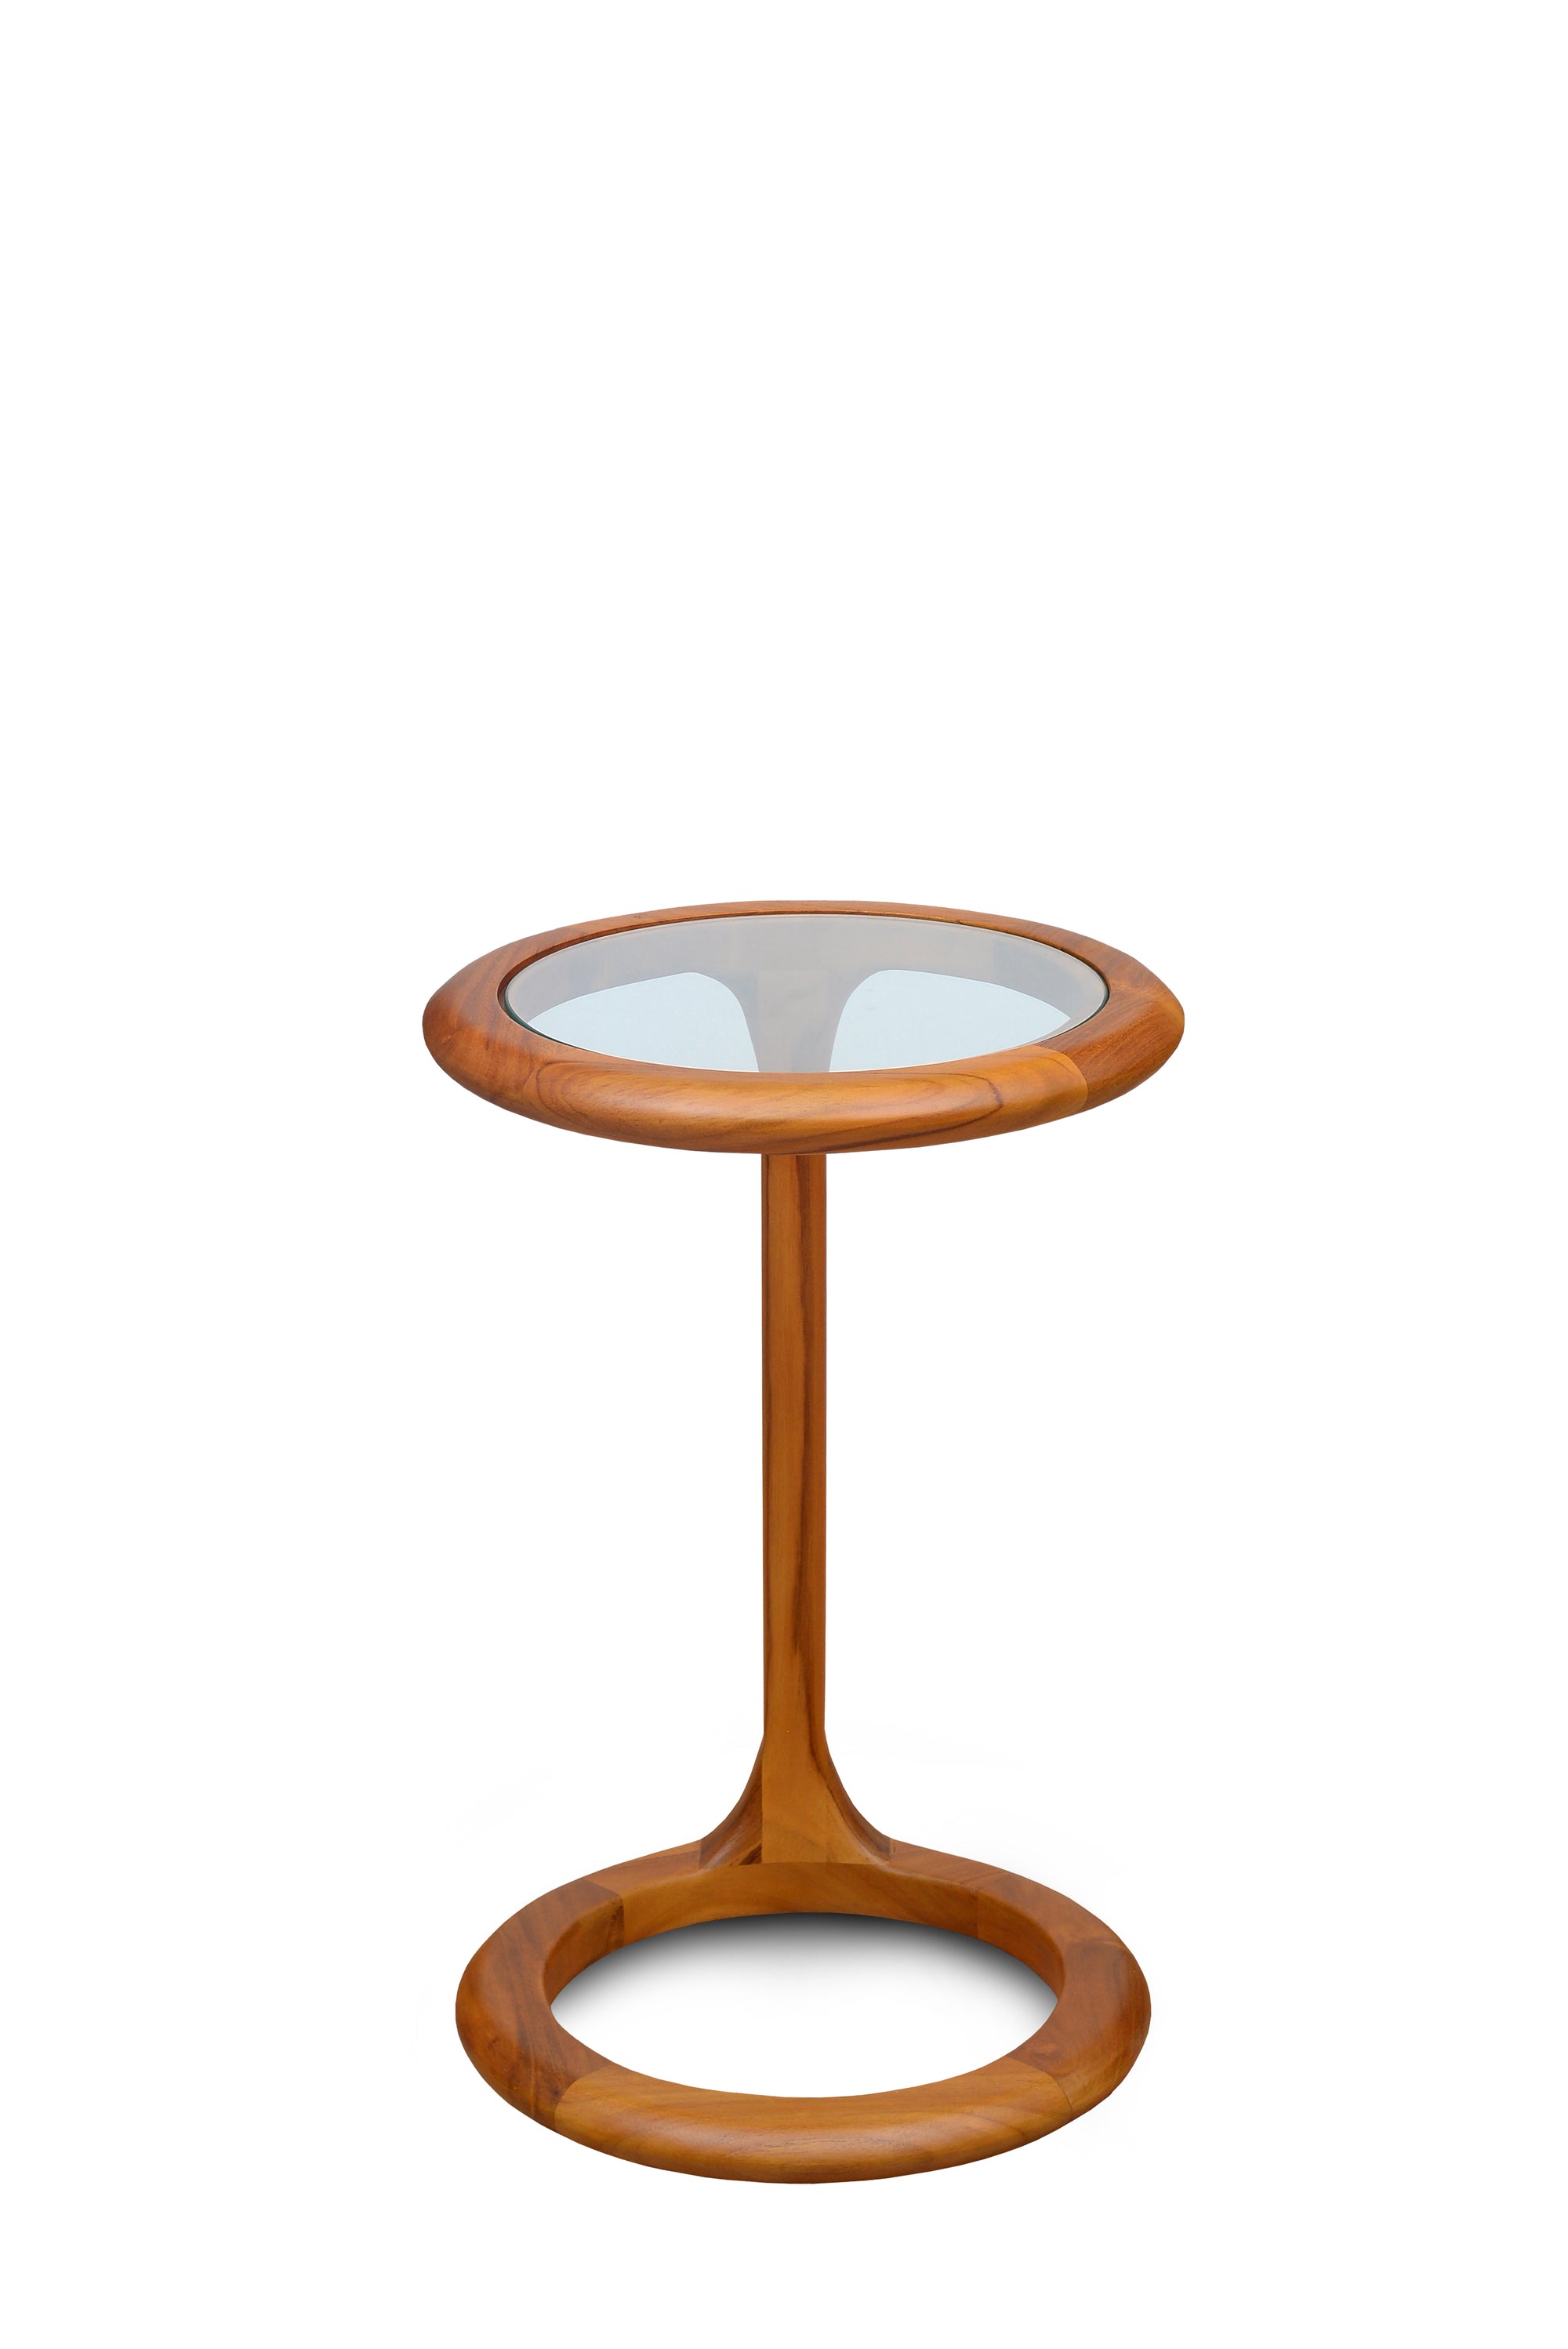 Nido High Table Teak with Glass Top in Candy Brown Finish